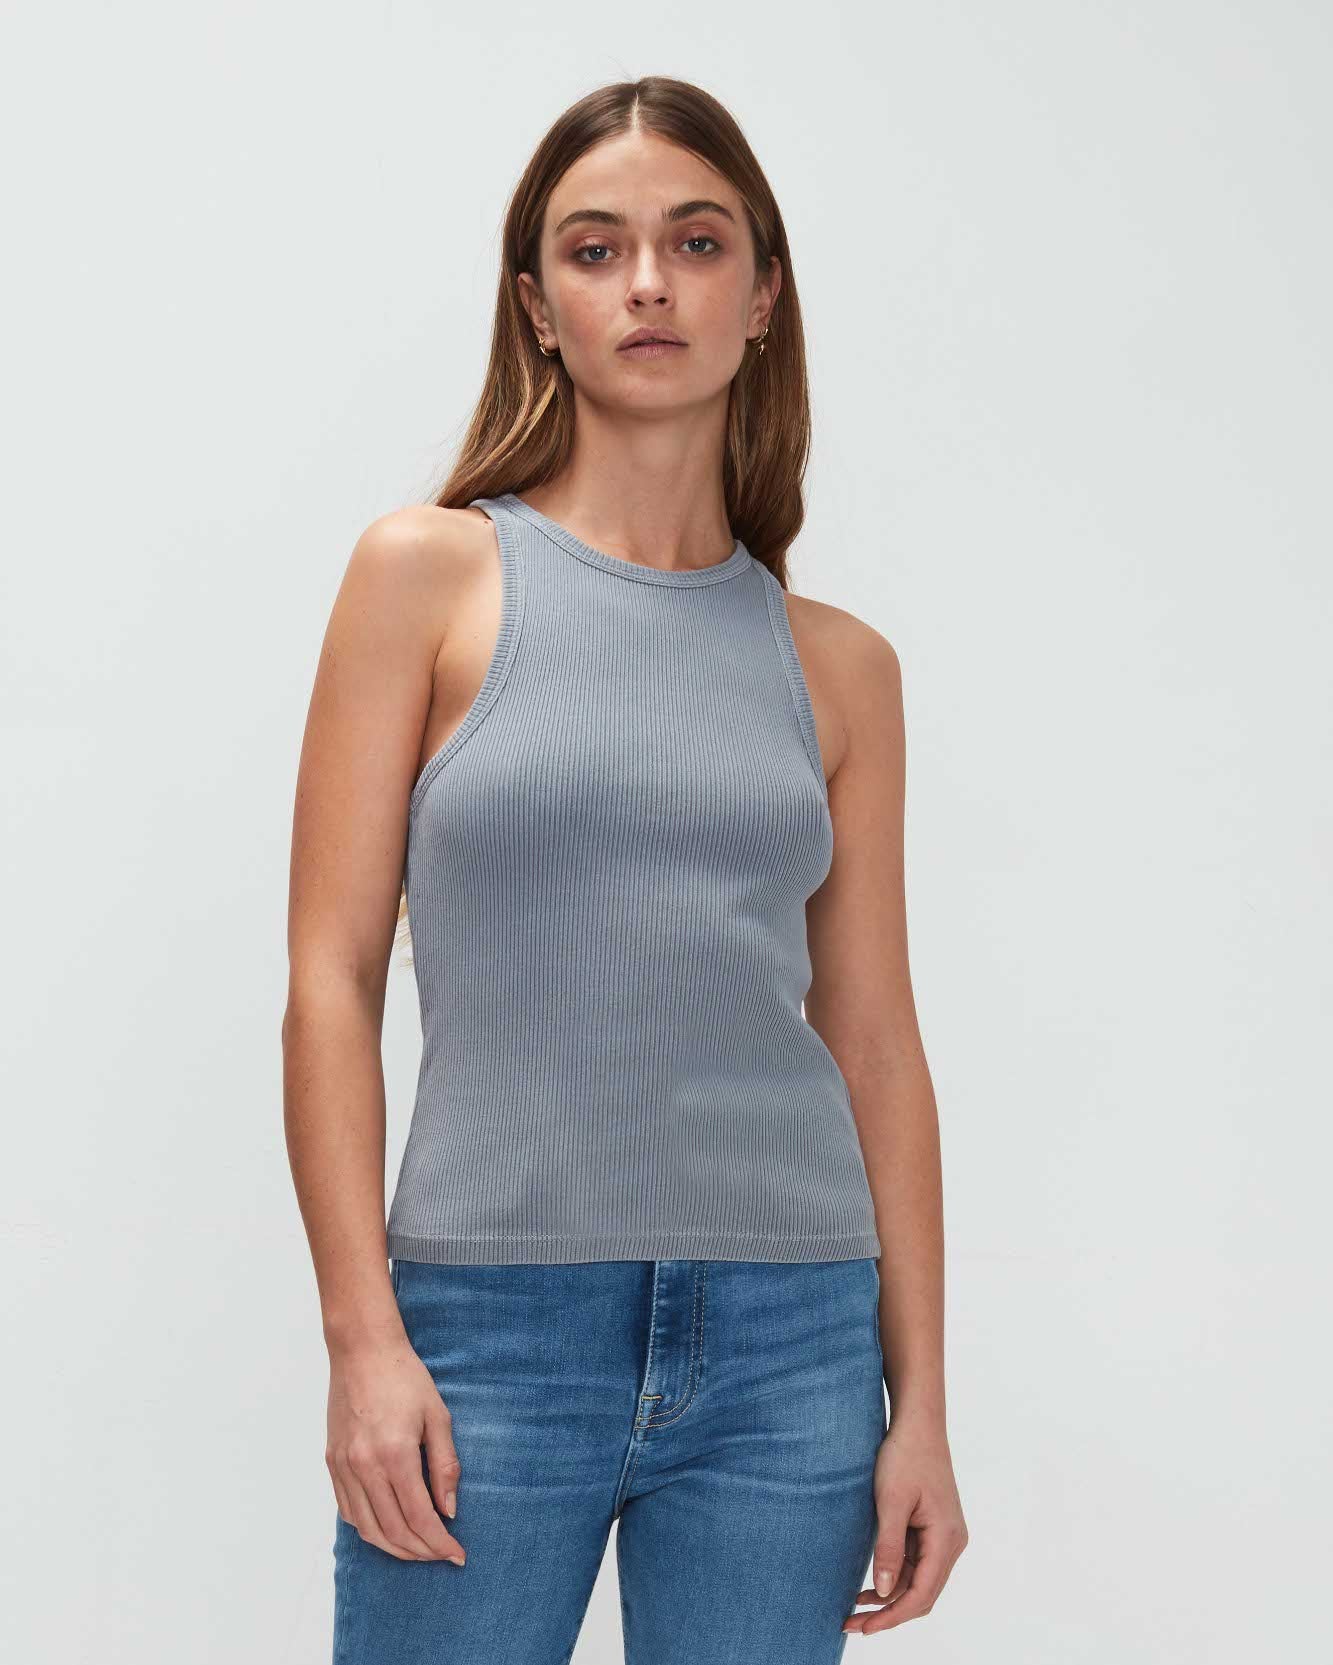 Racerback Tank In Soft Slate | 7 For All Mankind